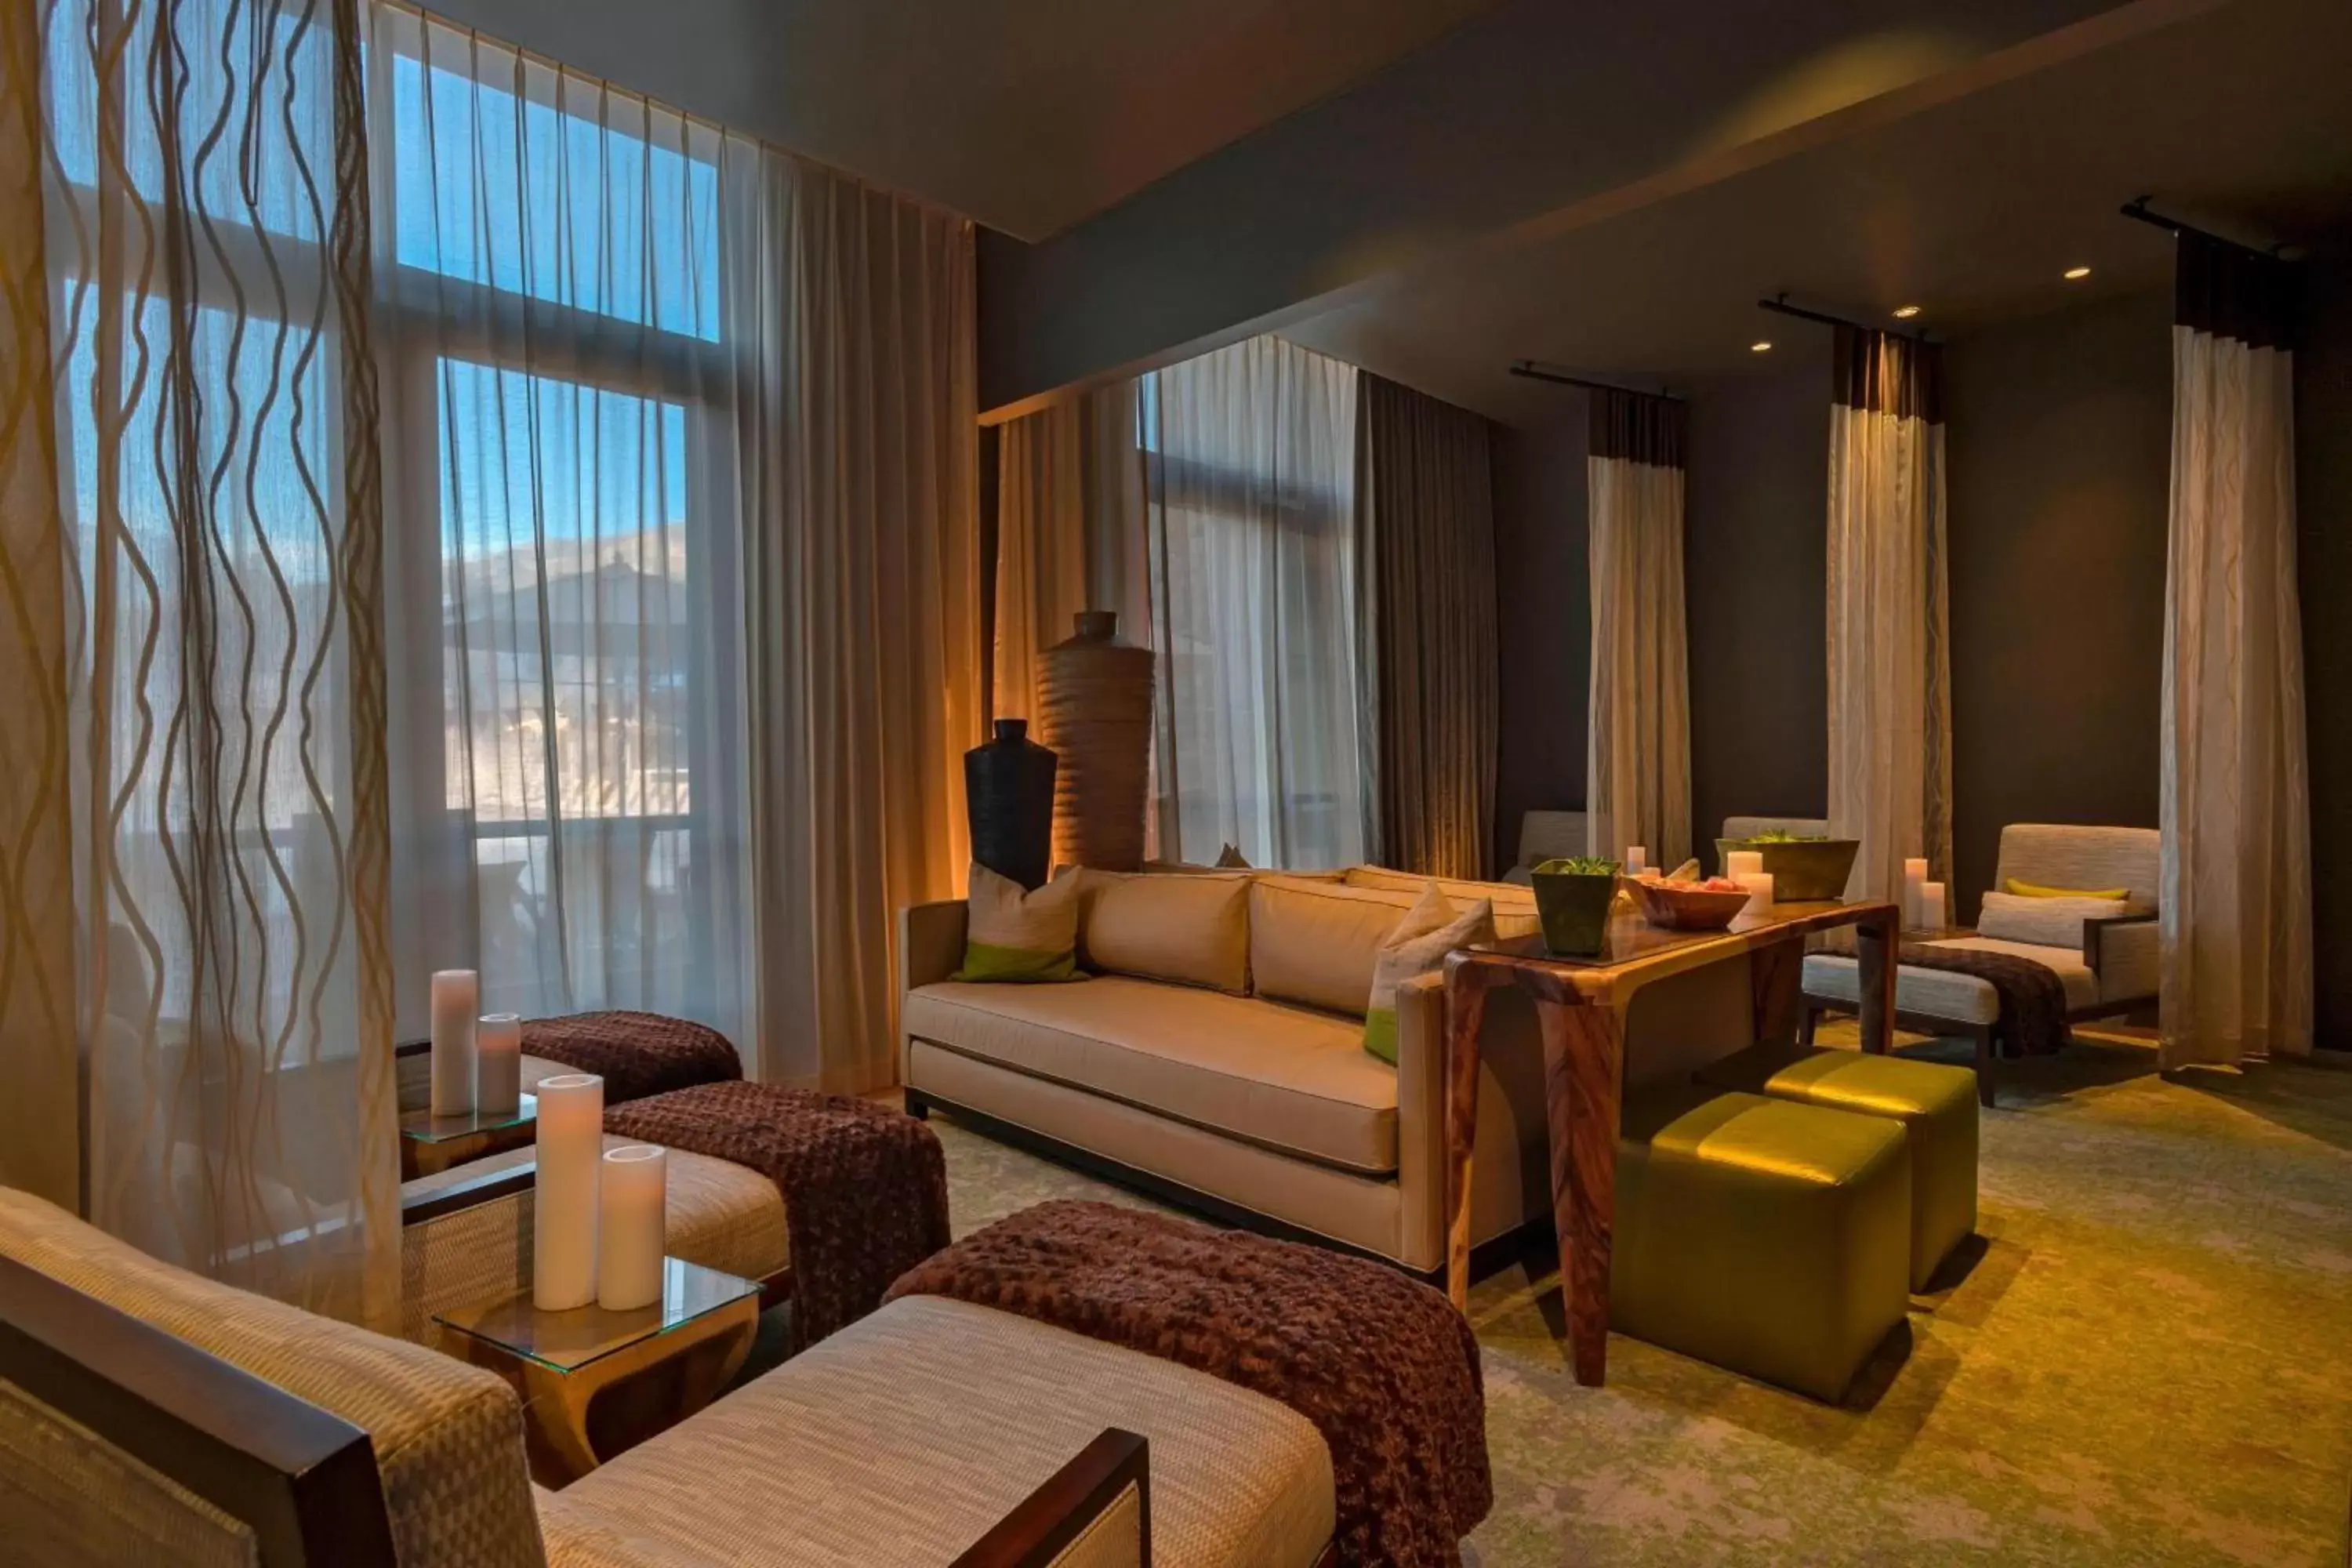 Lounge or bar, Seating Area in The Westin Riverfront Resort & Spa, Avon, Vail Valley